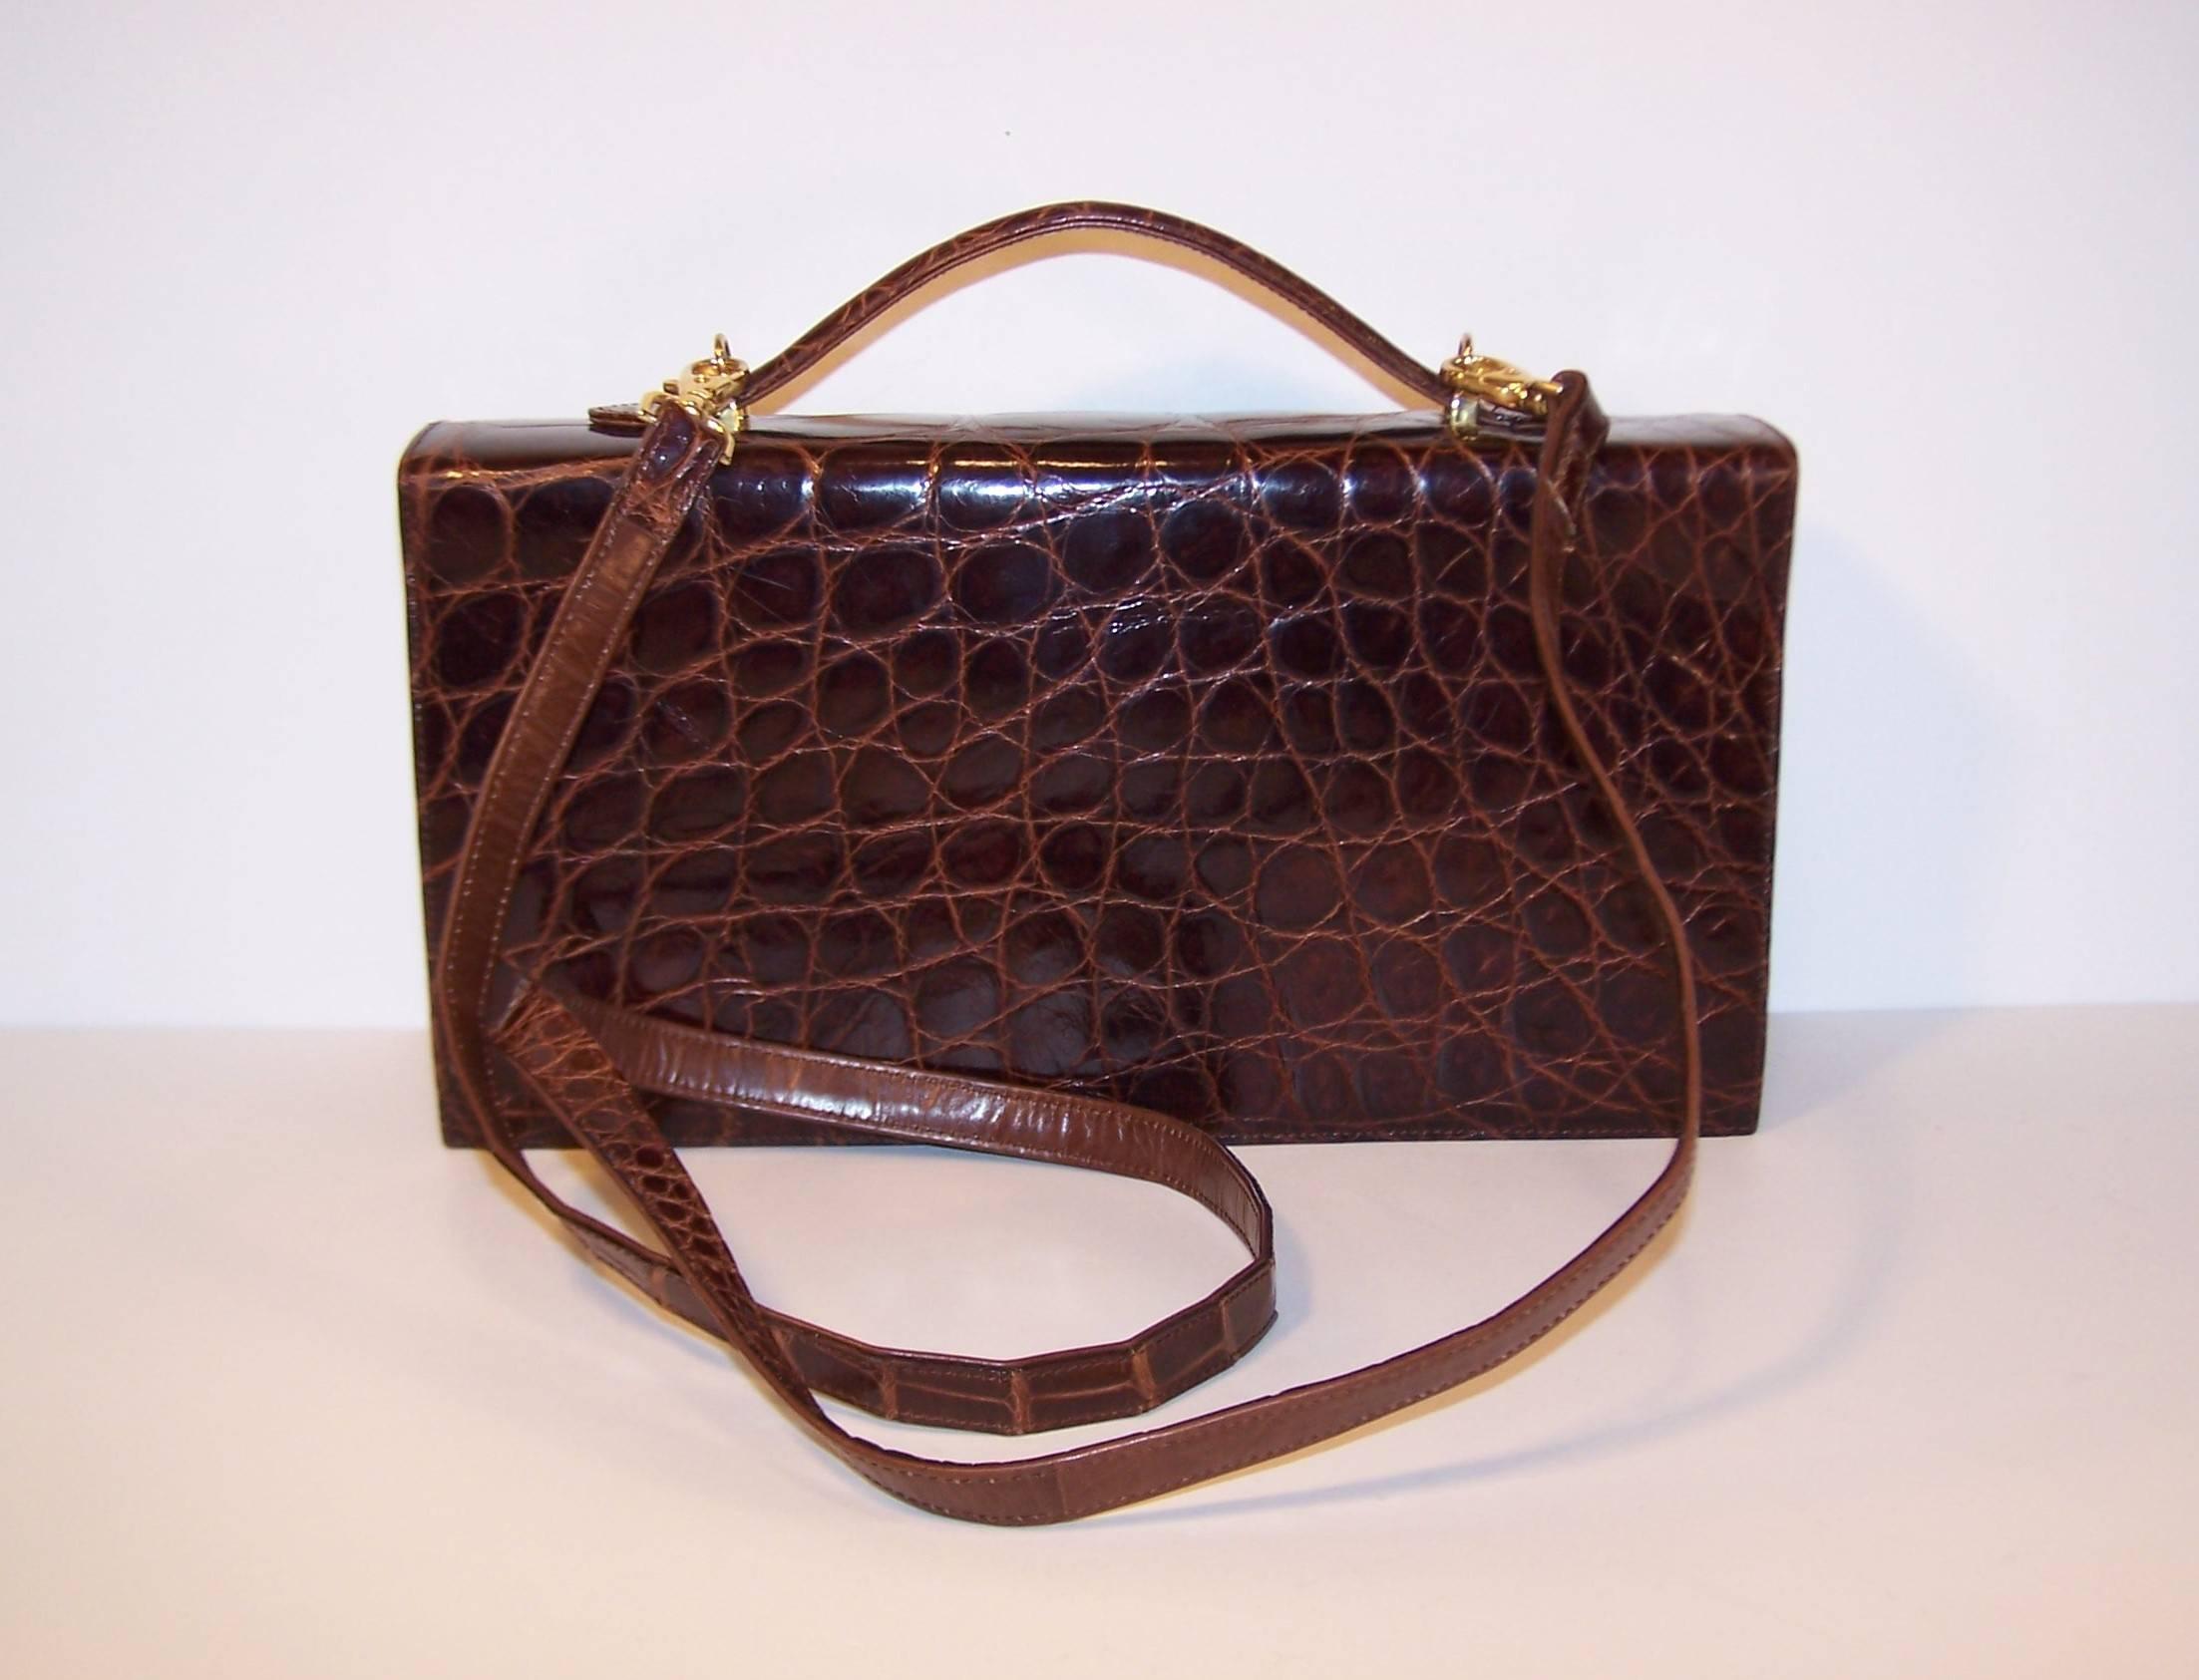 This is a handsome 1970's brown alligator handbag produced in Italy for Saks Fifth Avenue with a classic design and versatile features that make it a perfect pairing for a modern wardrobe.  The rectangular accordion shape is equipped with a snap